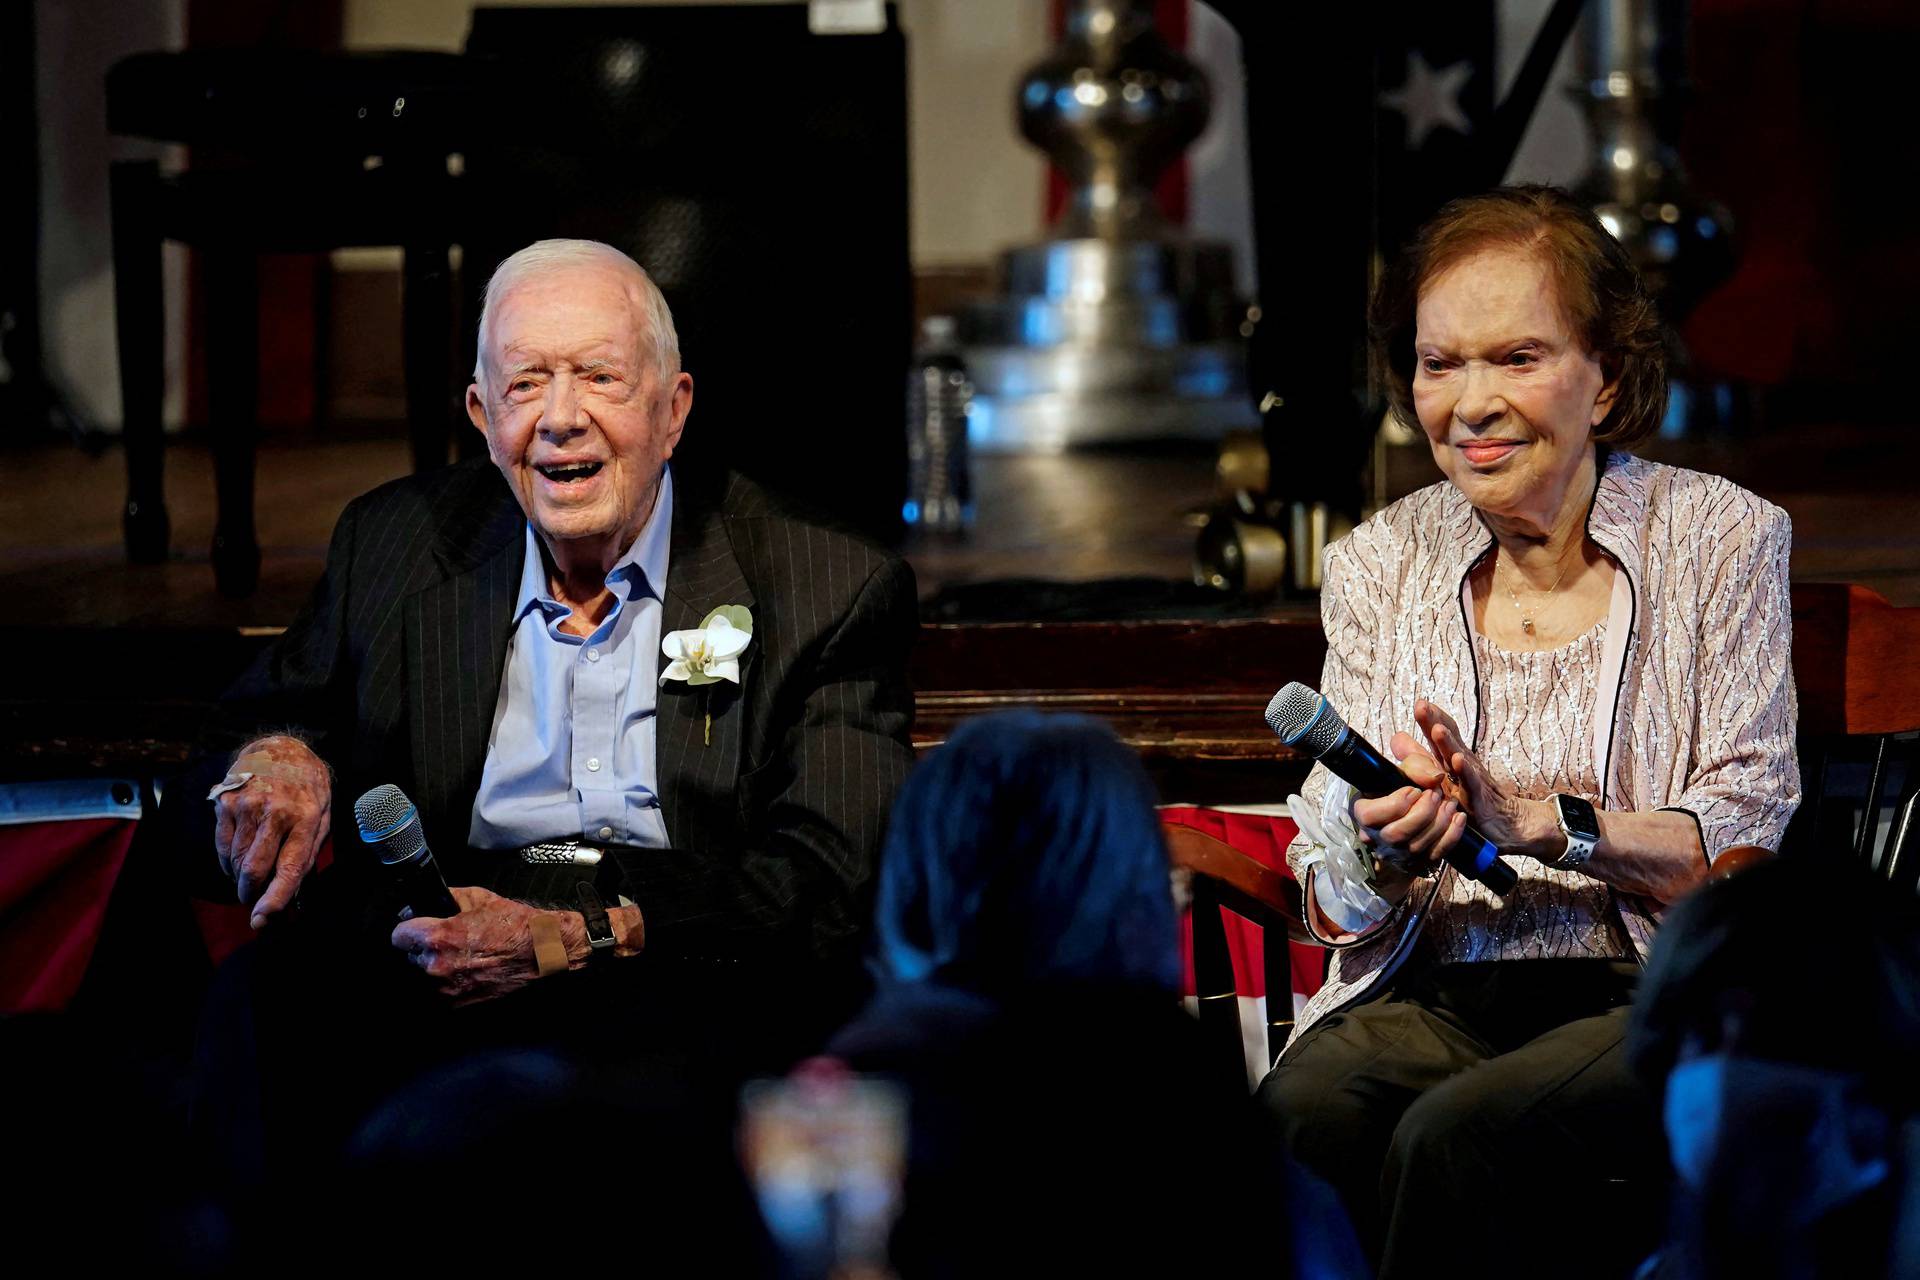 FILE PHOTO: Former U.S. President Jimmy Carter and his wife, former first lady Rosalynn Carter celebrate their 75th wedding anniversary in Plains, Georgia